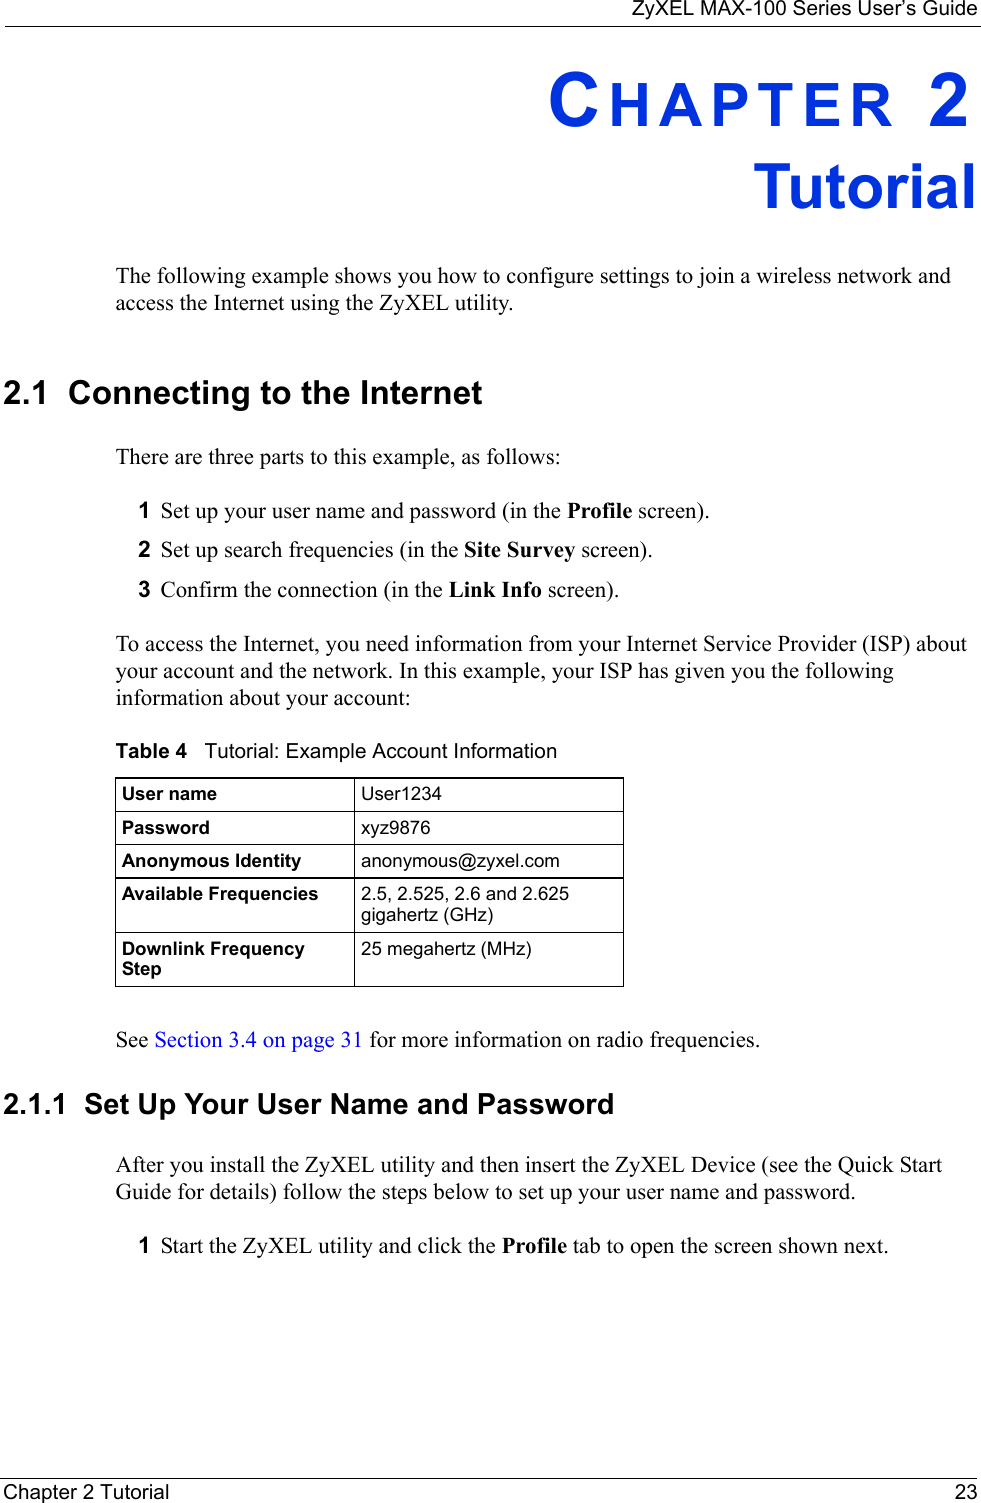 ZyXEL MAX-100 Series User’s GuideChapter 2 Tutorial 23CHAPTER 2TutorialThe following example shows you how to configure settings to join a wireless network and access the Internet using the ZyXEL utility. 2.1  Connecting to the InternetThere are three parts to this example, as follows:1Set up your user name and password (in the Profile screen).2Set up search frequencies (in the Site Survey screen).3Confirm the connection (in the Link Info screen).To access the Internet, you need information from your Internet Service Provider (ISP) about your account and the network. In this example, your ISP has given you the following information about your account:See Section 3.4 on page 31 for more information on radio frequencies.2.1.1  Set Up Your User Name and PasswordAfter you install the ZyXEL utility and then insert the ZyXEL Device (see the Quick Start Guide for details) follow the steps below to set up your user name and password.1Start the ZyXEL utility and click the Profile tab to open the screen shown next.Table 4   Tutorial: Example Account InformationUser name User1234Password xyz9876Anonymous Identity anonymous@zyxel.comAvailable Frequencies 2.5, 2.525, 2.6 and 2.625 gigahertz (GHz)Downlink Frequency Step25 megahertz (MHz)